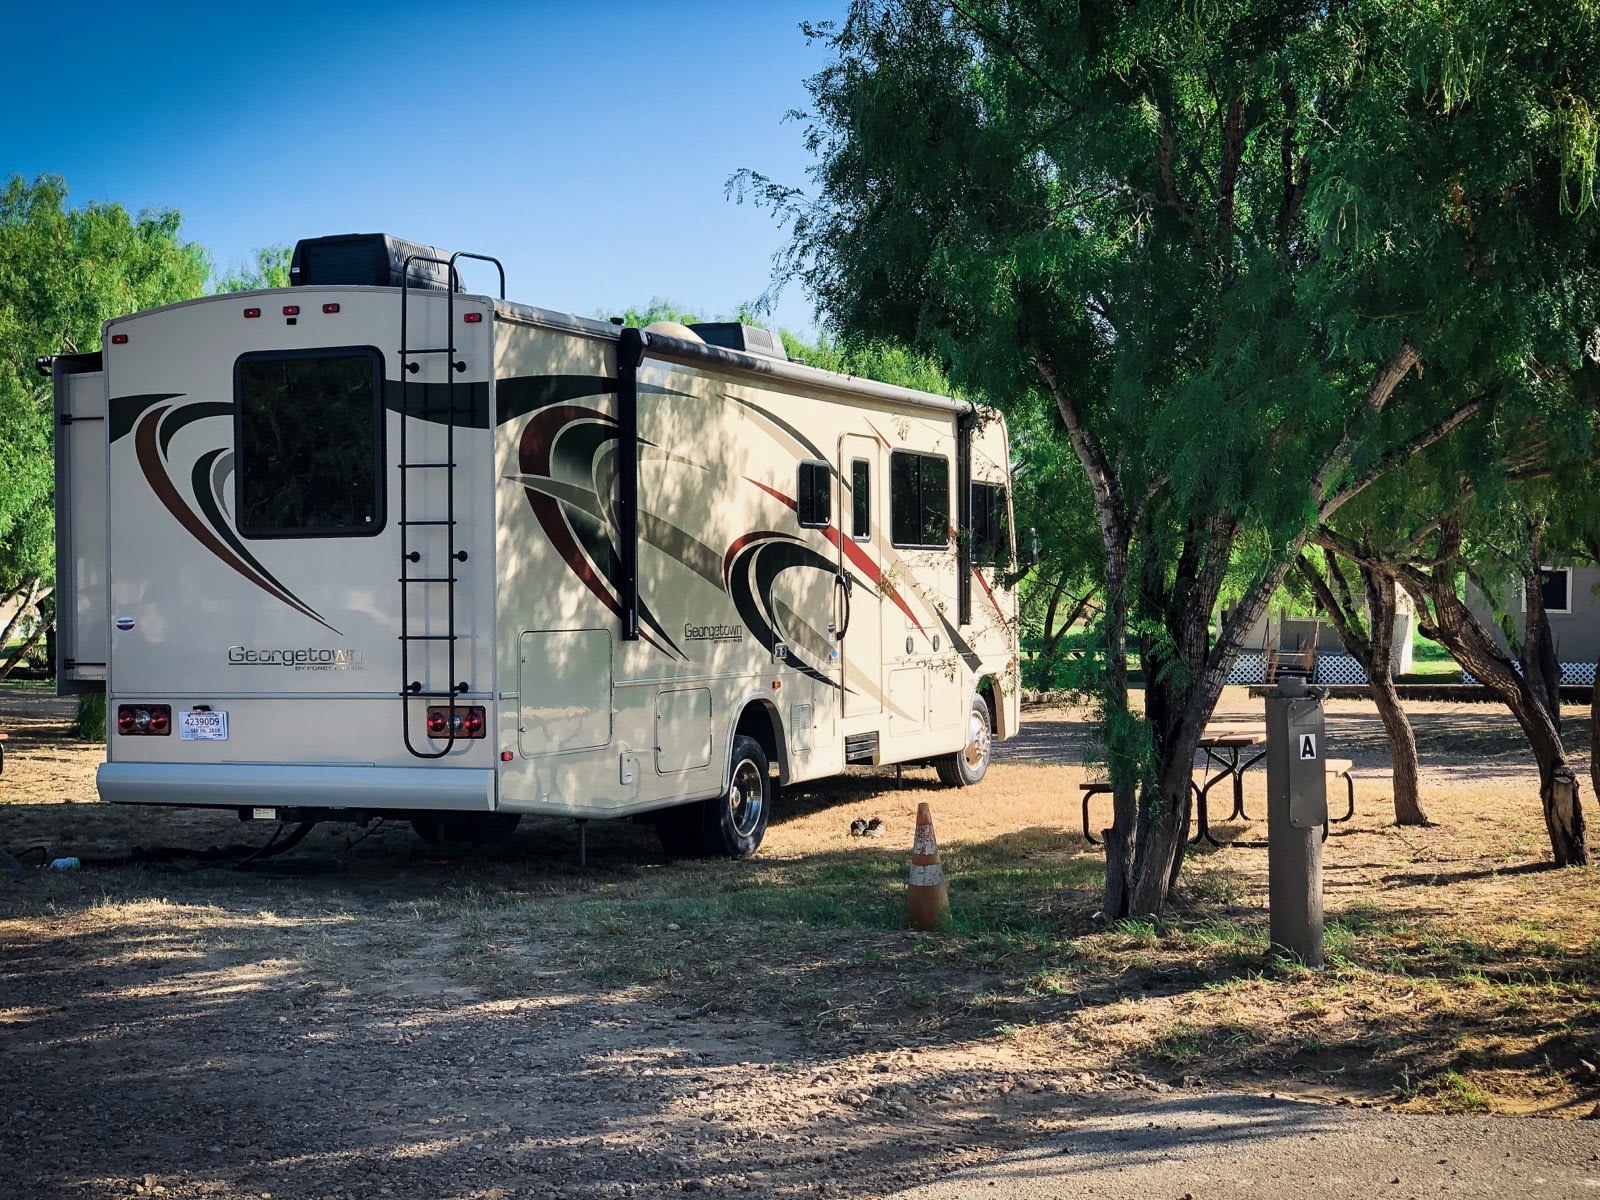 Great campsites in central Texas warm winters and breezey texas nights for camping in texas and going to attractions and day trips